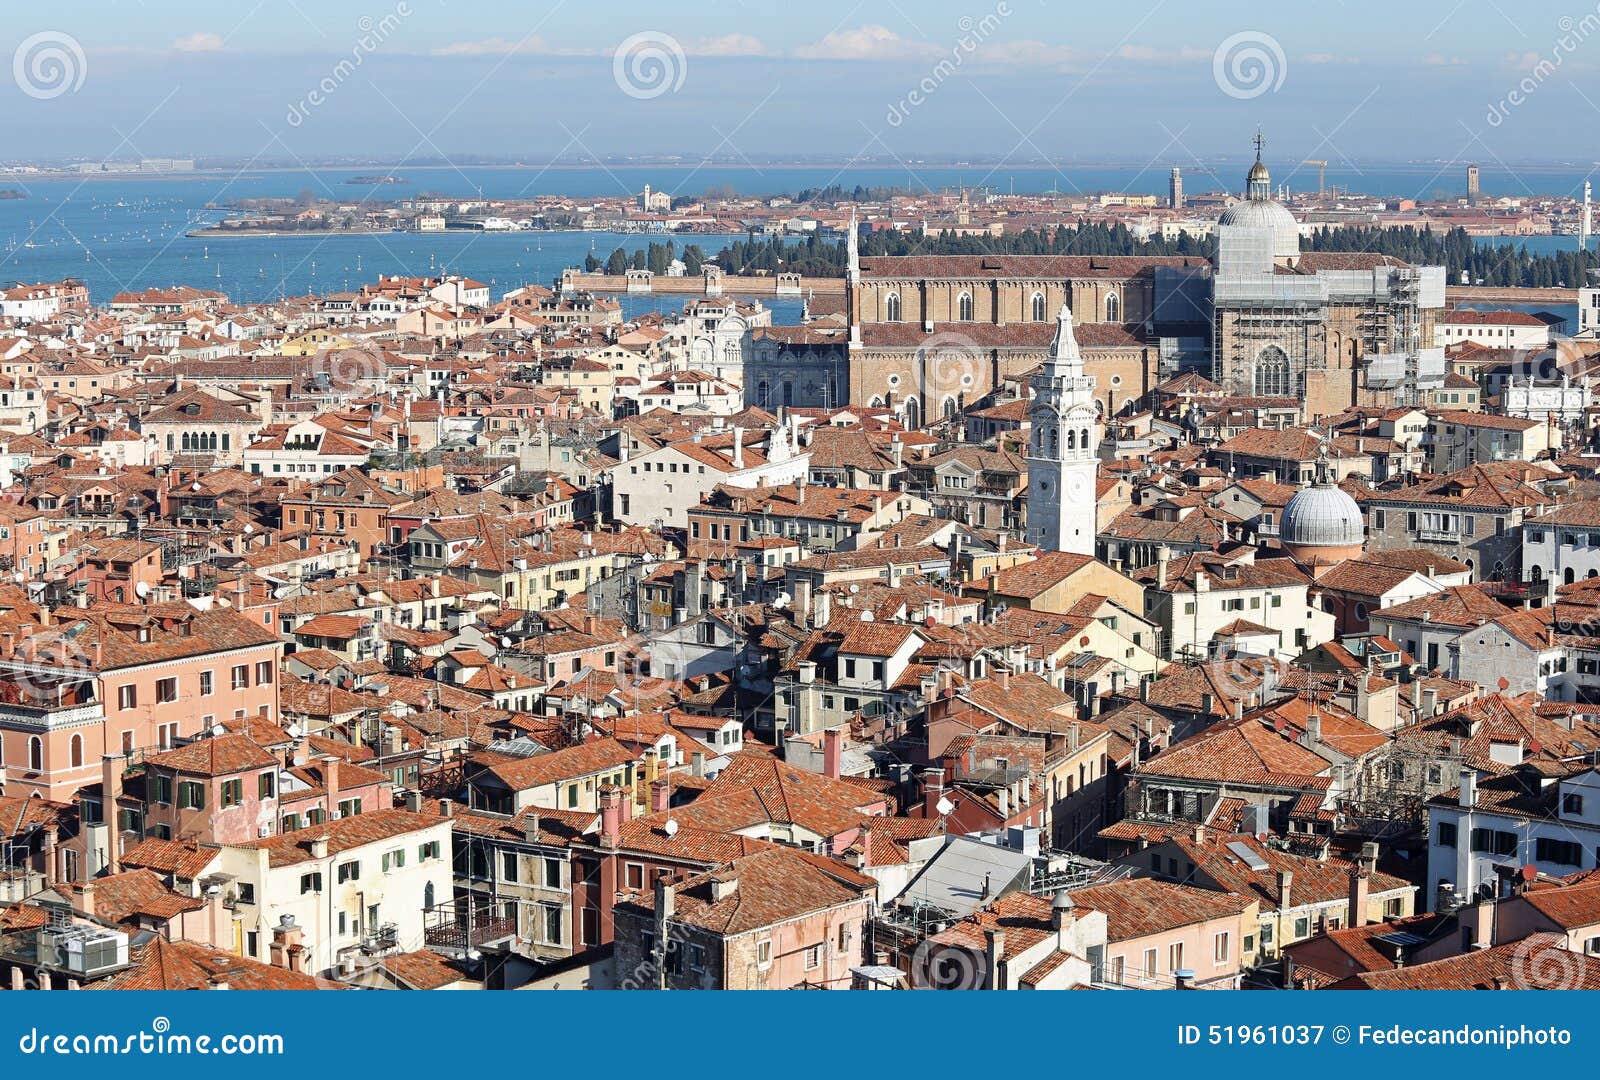 venice, italy, venetian rooftops and the church